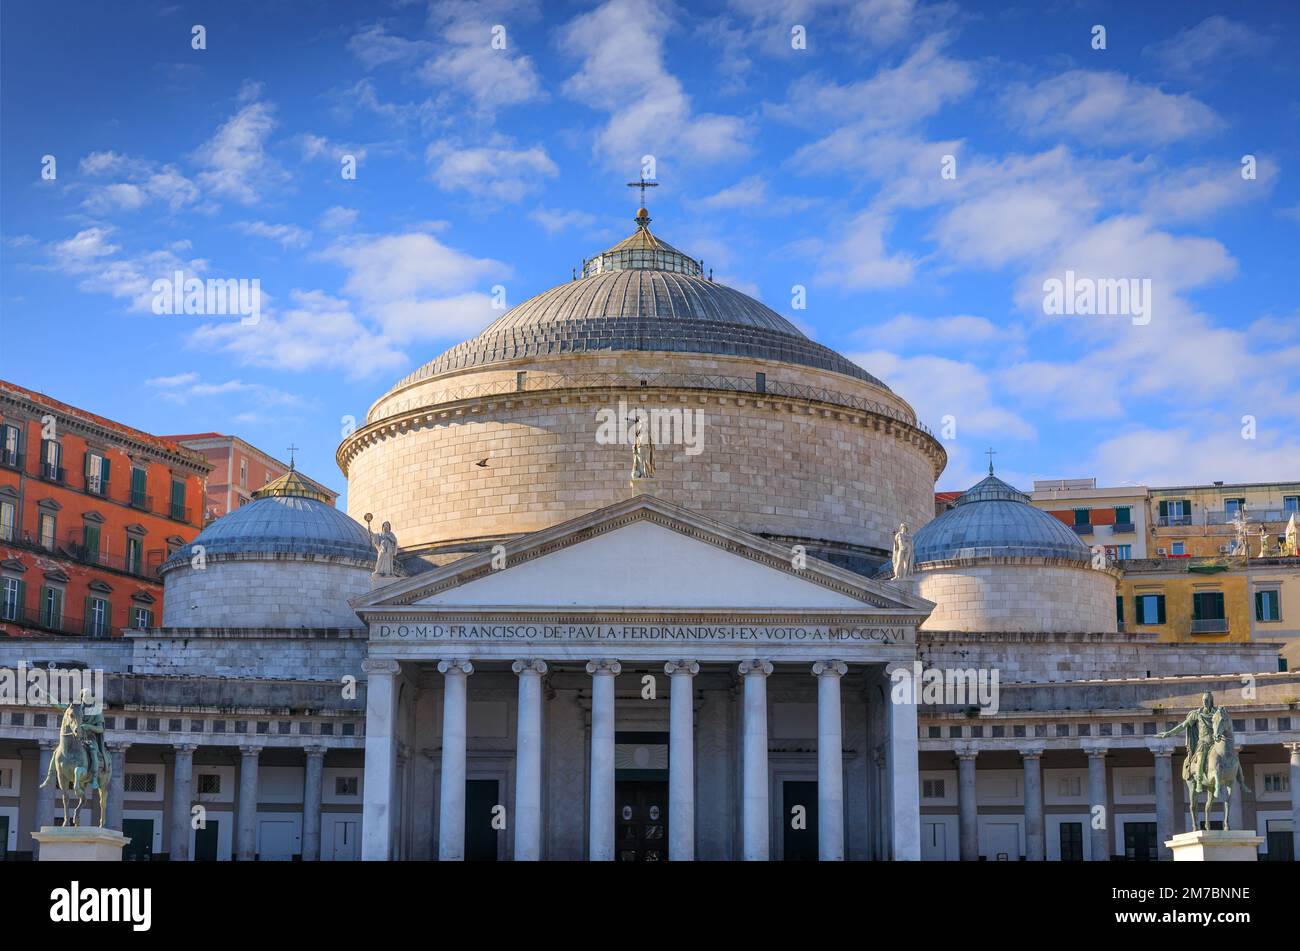 Plebiscite Square, the symbol of the city of Naples: the Royal Pontifical Basilica of Saint Francis of Paola. Stock Photo